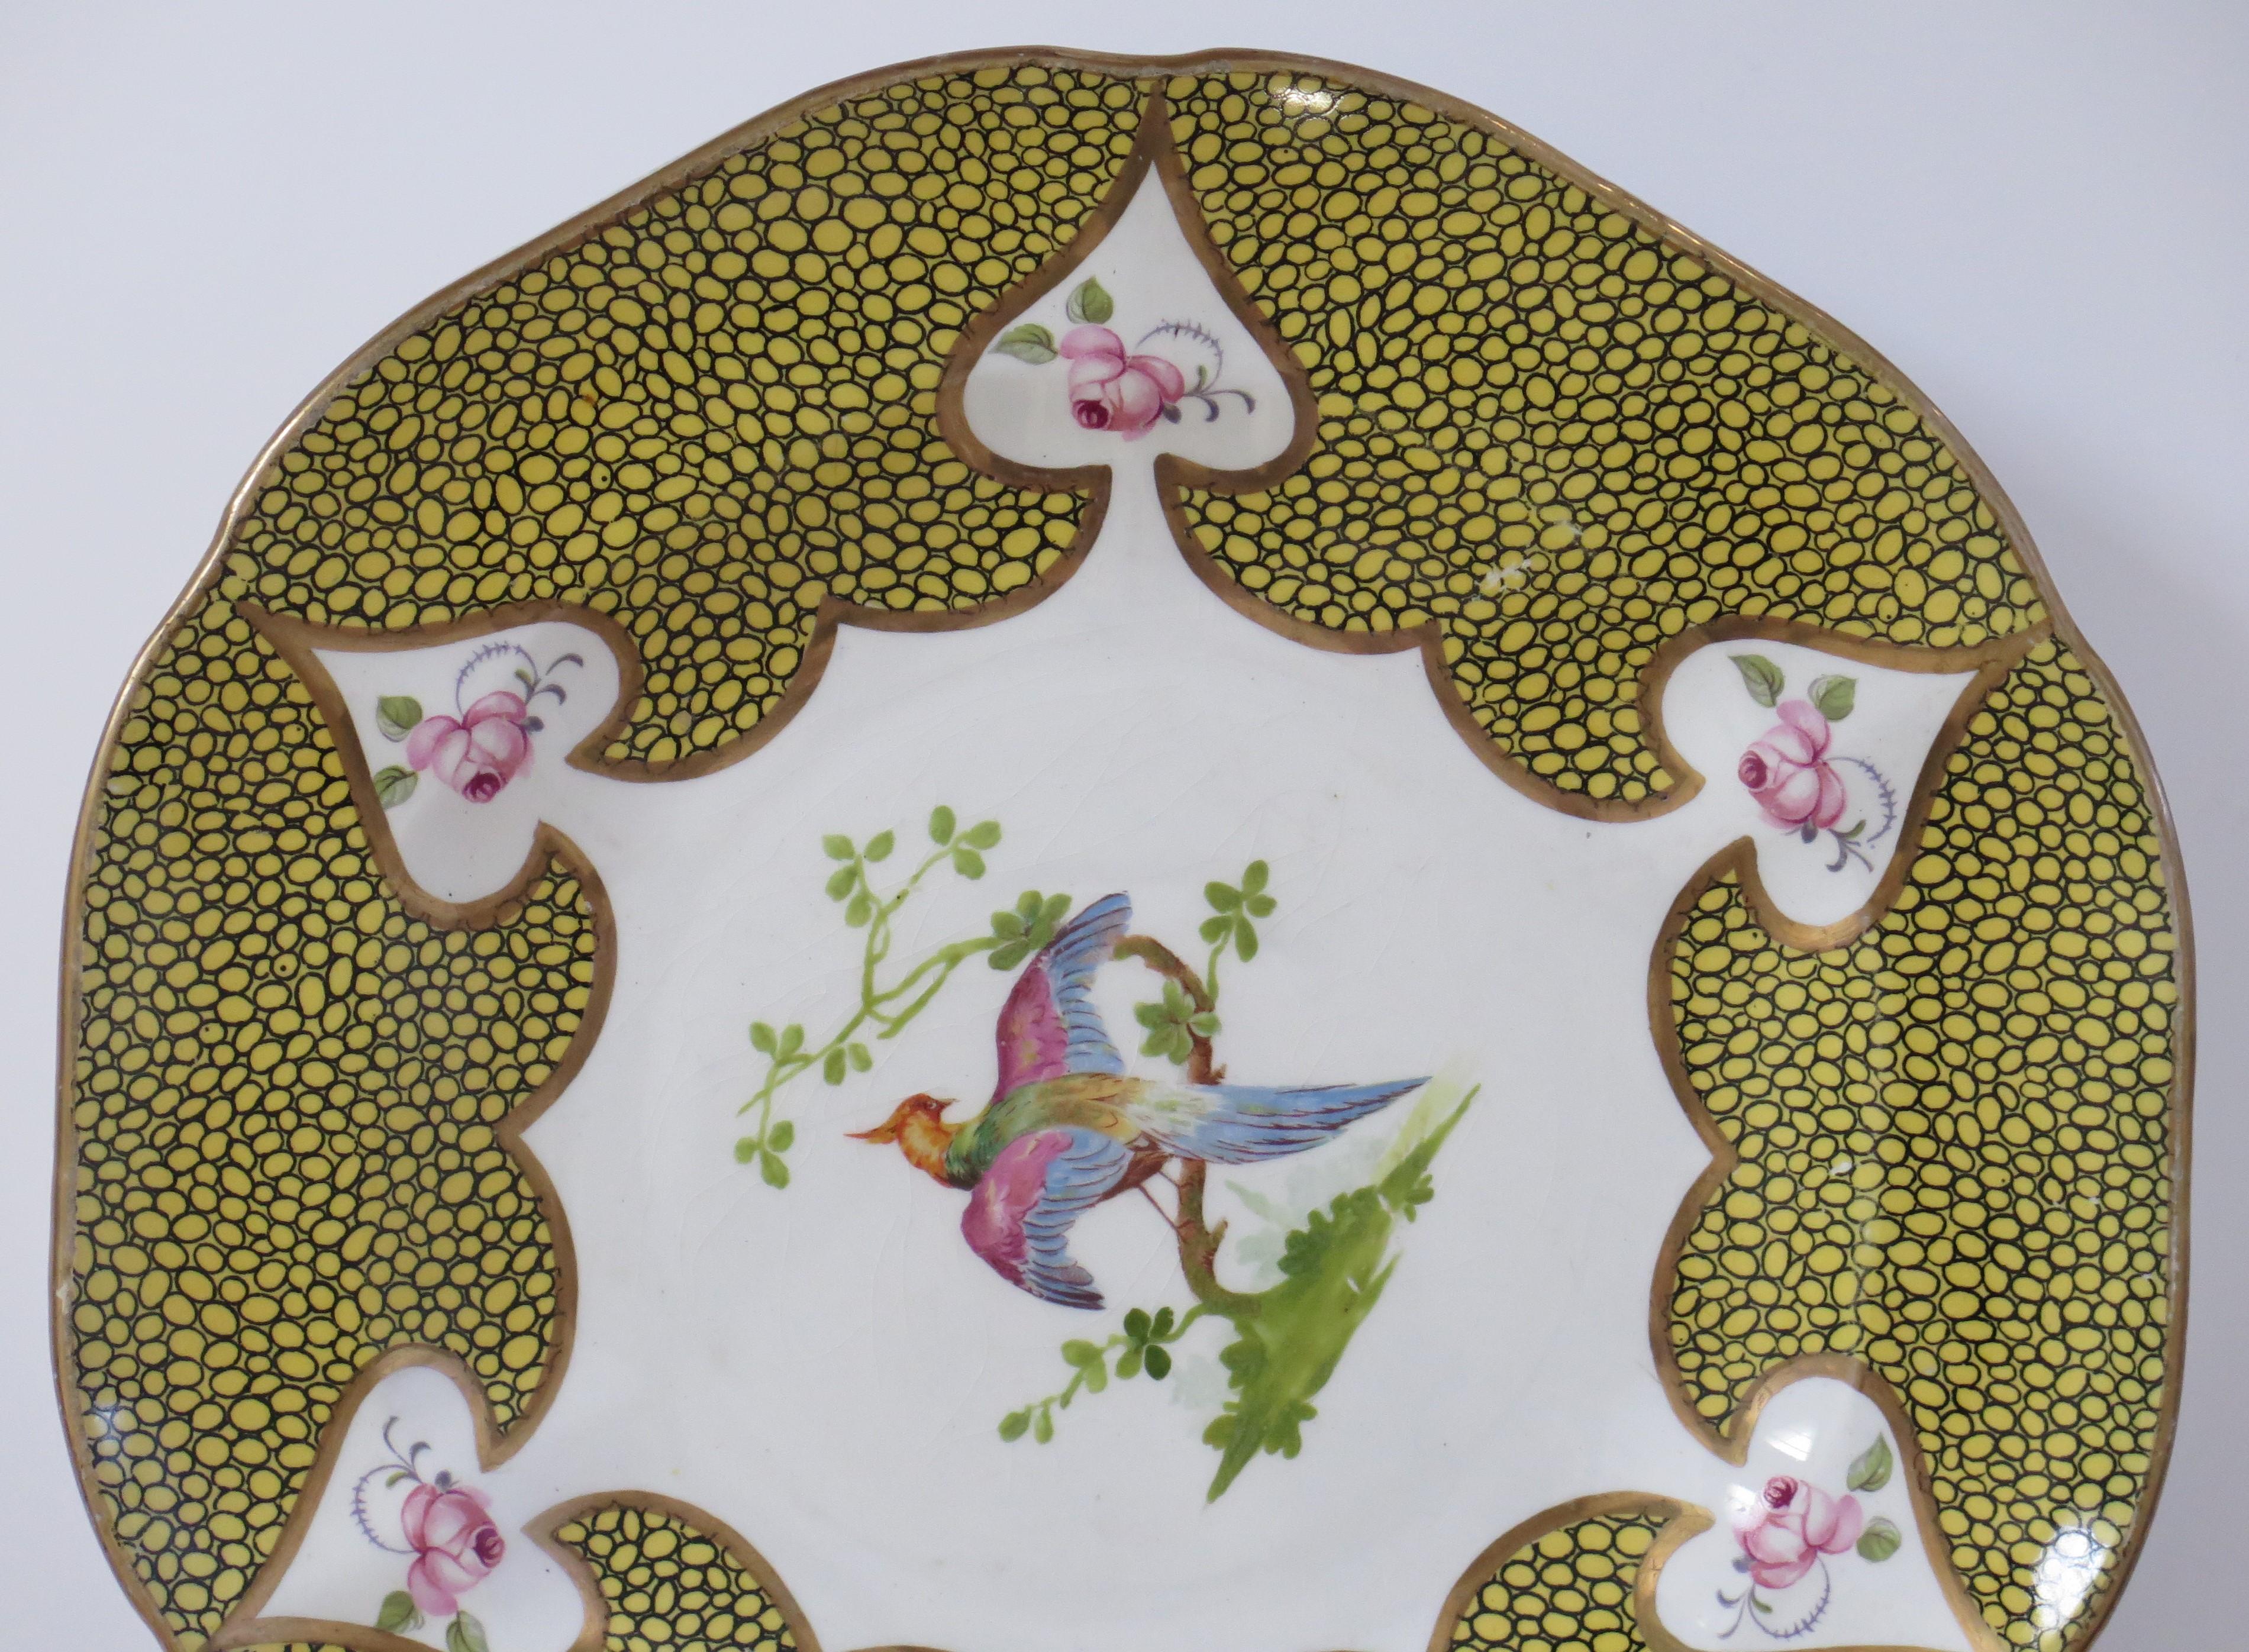 This is a very beautiful Ironstone Cabinet Plate, all hand painted and made by Mason's during the period when the factory was owned by the Ashworth Brothers, Hanley, Staffordshire, England, during the very early 20th Century Edwardian period, circa